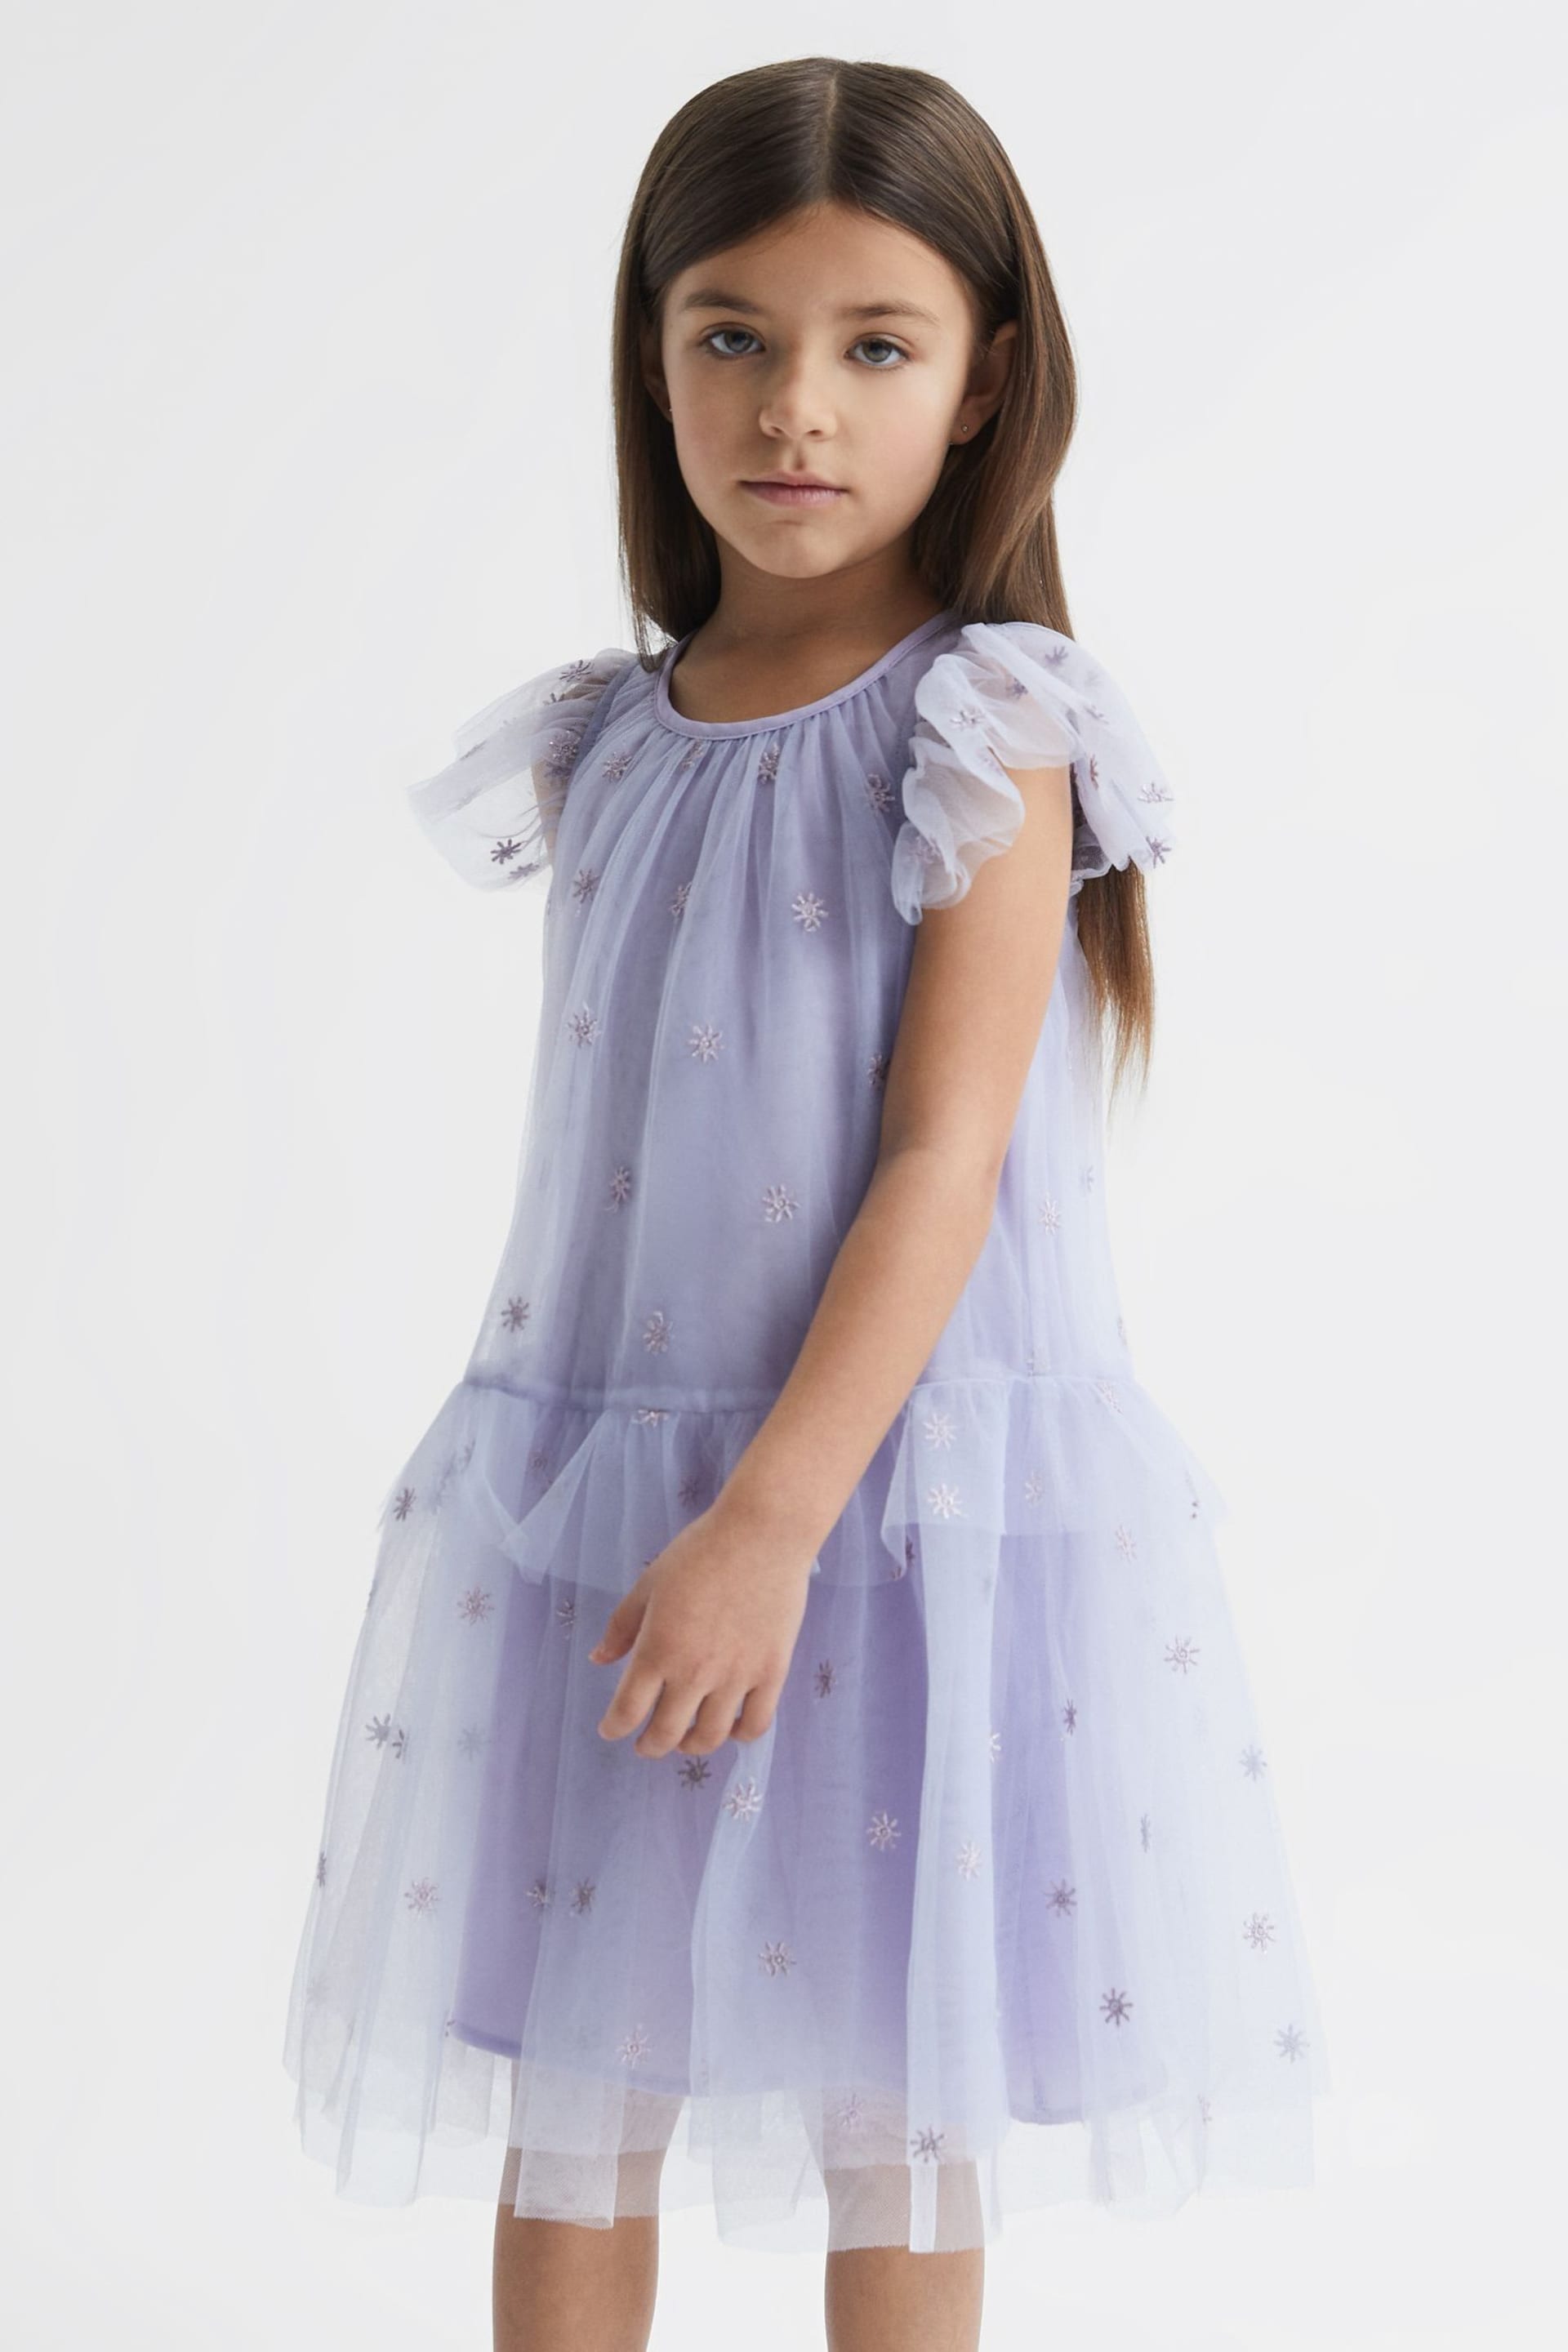 Reiss Lilac Fifi Junior Tulle Embroidered Dress - Image 1 of 6